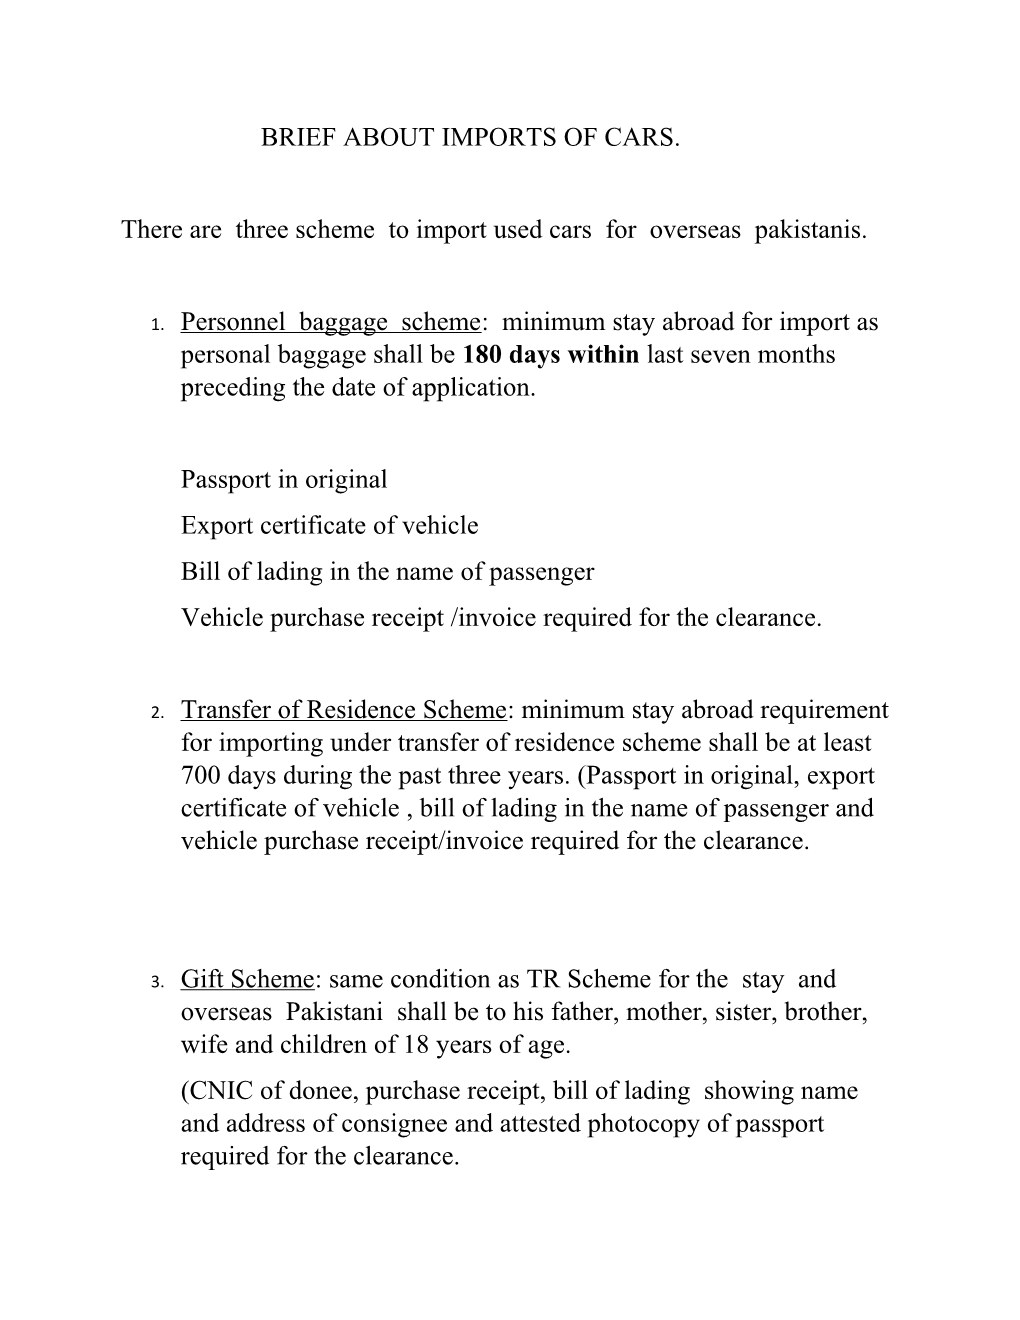 Brief About Imports of Cars